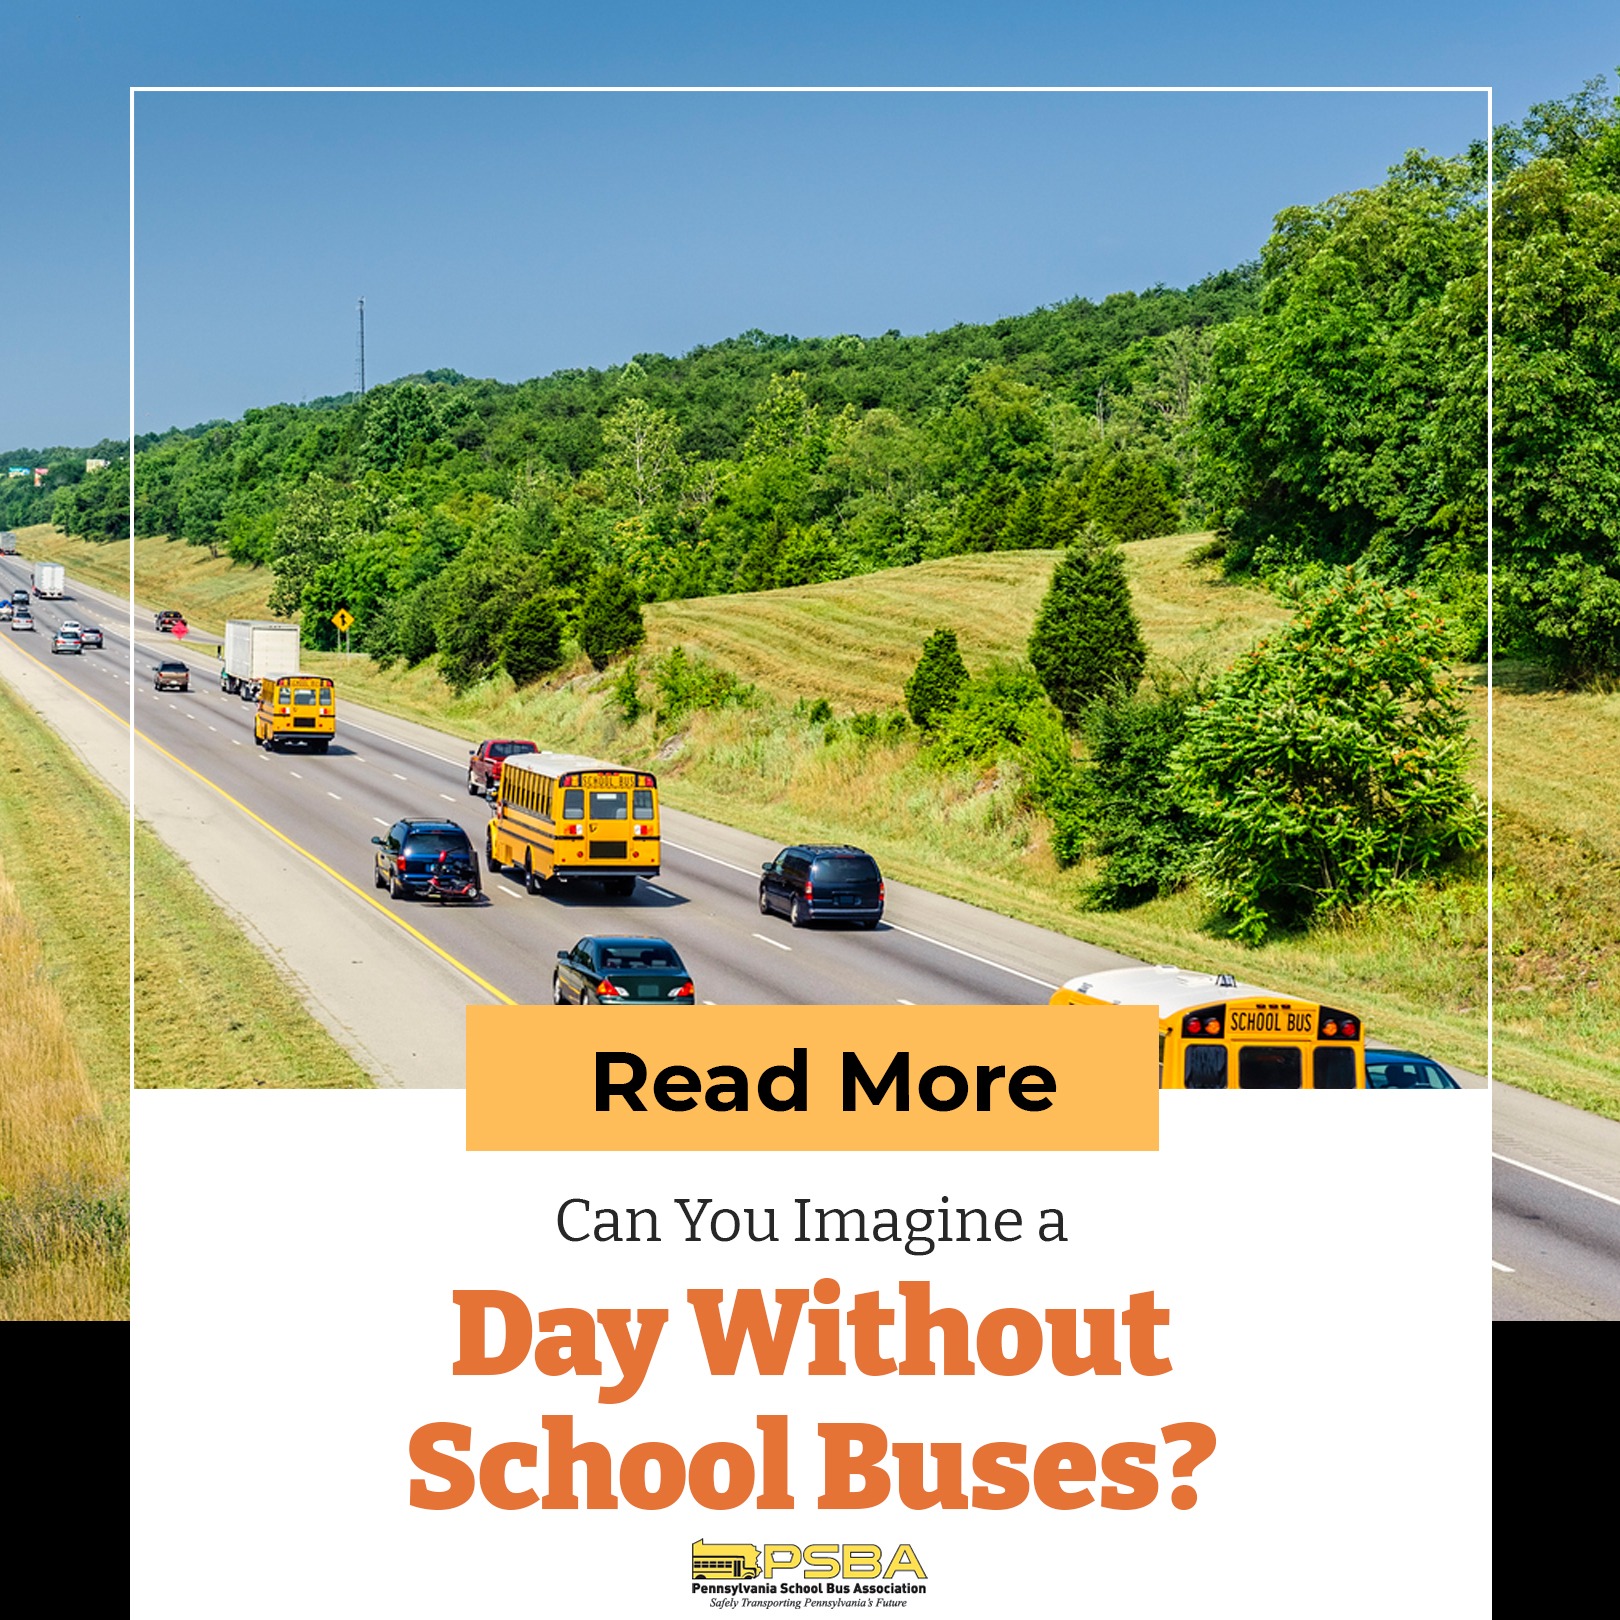 Can You Imagine a Day Without School Buses?